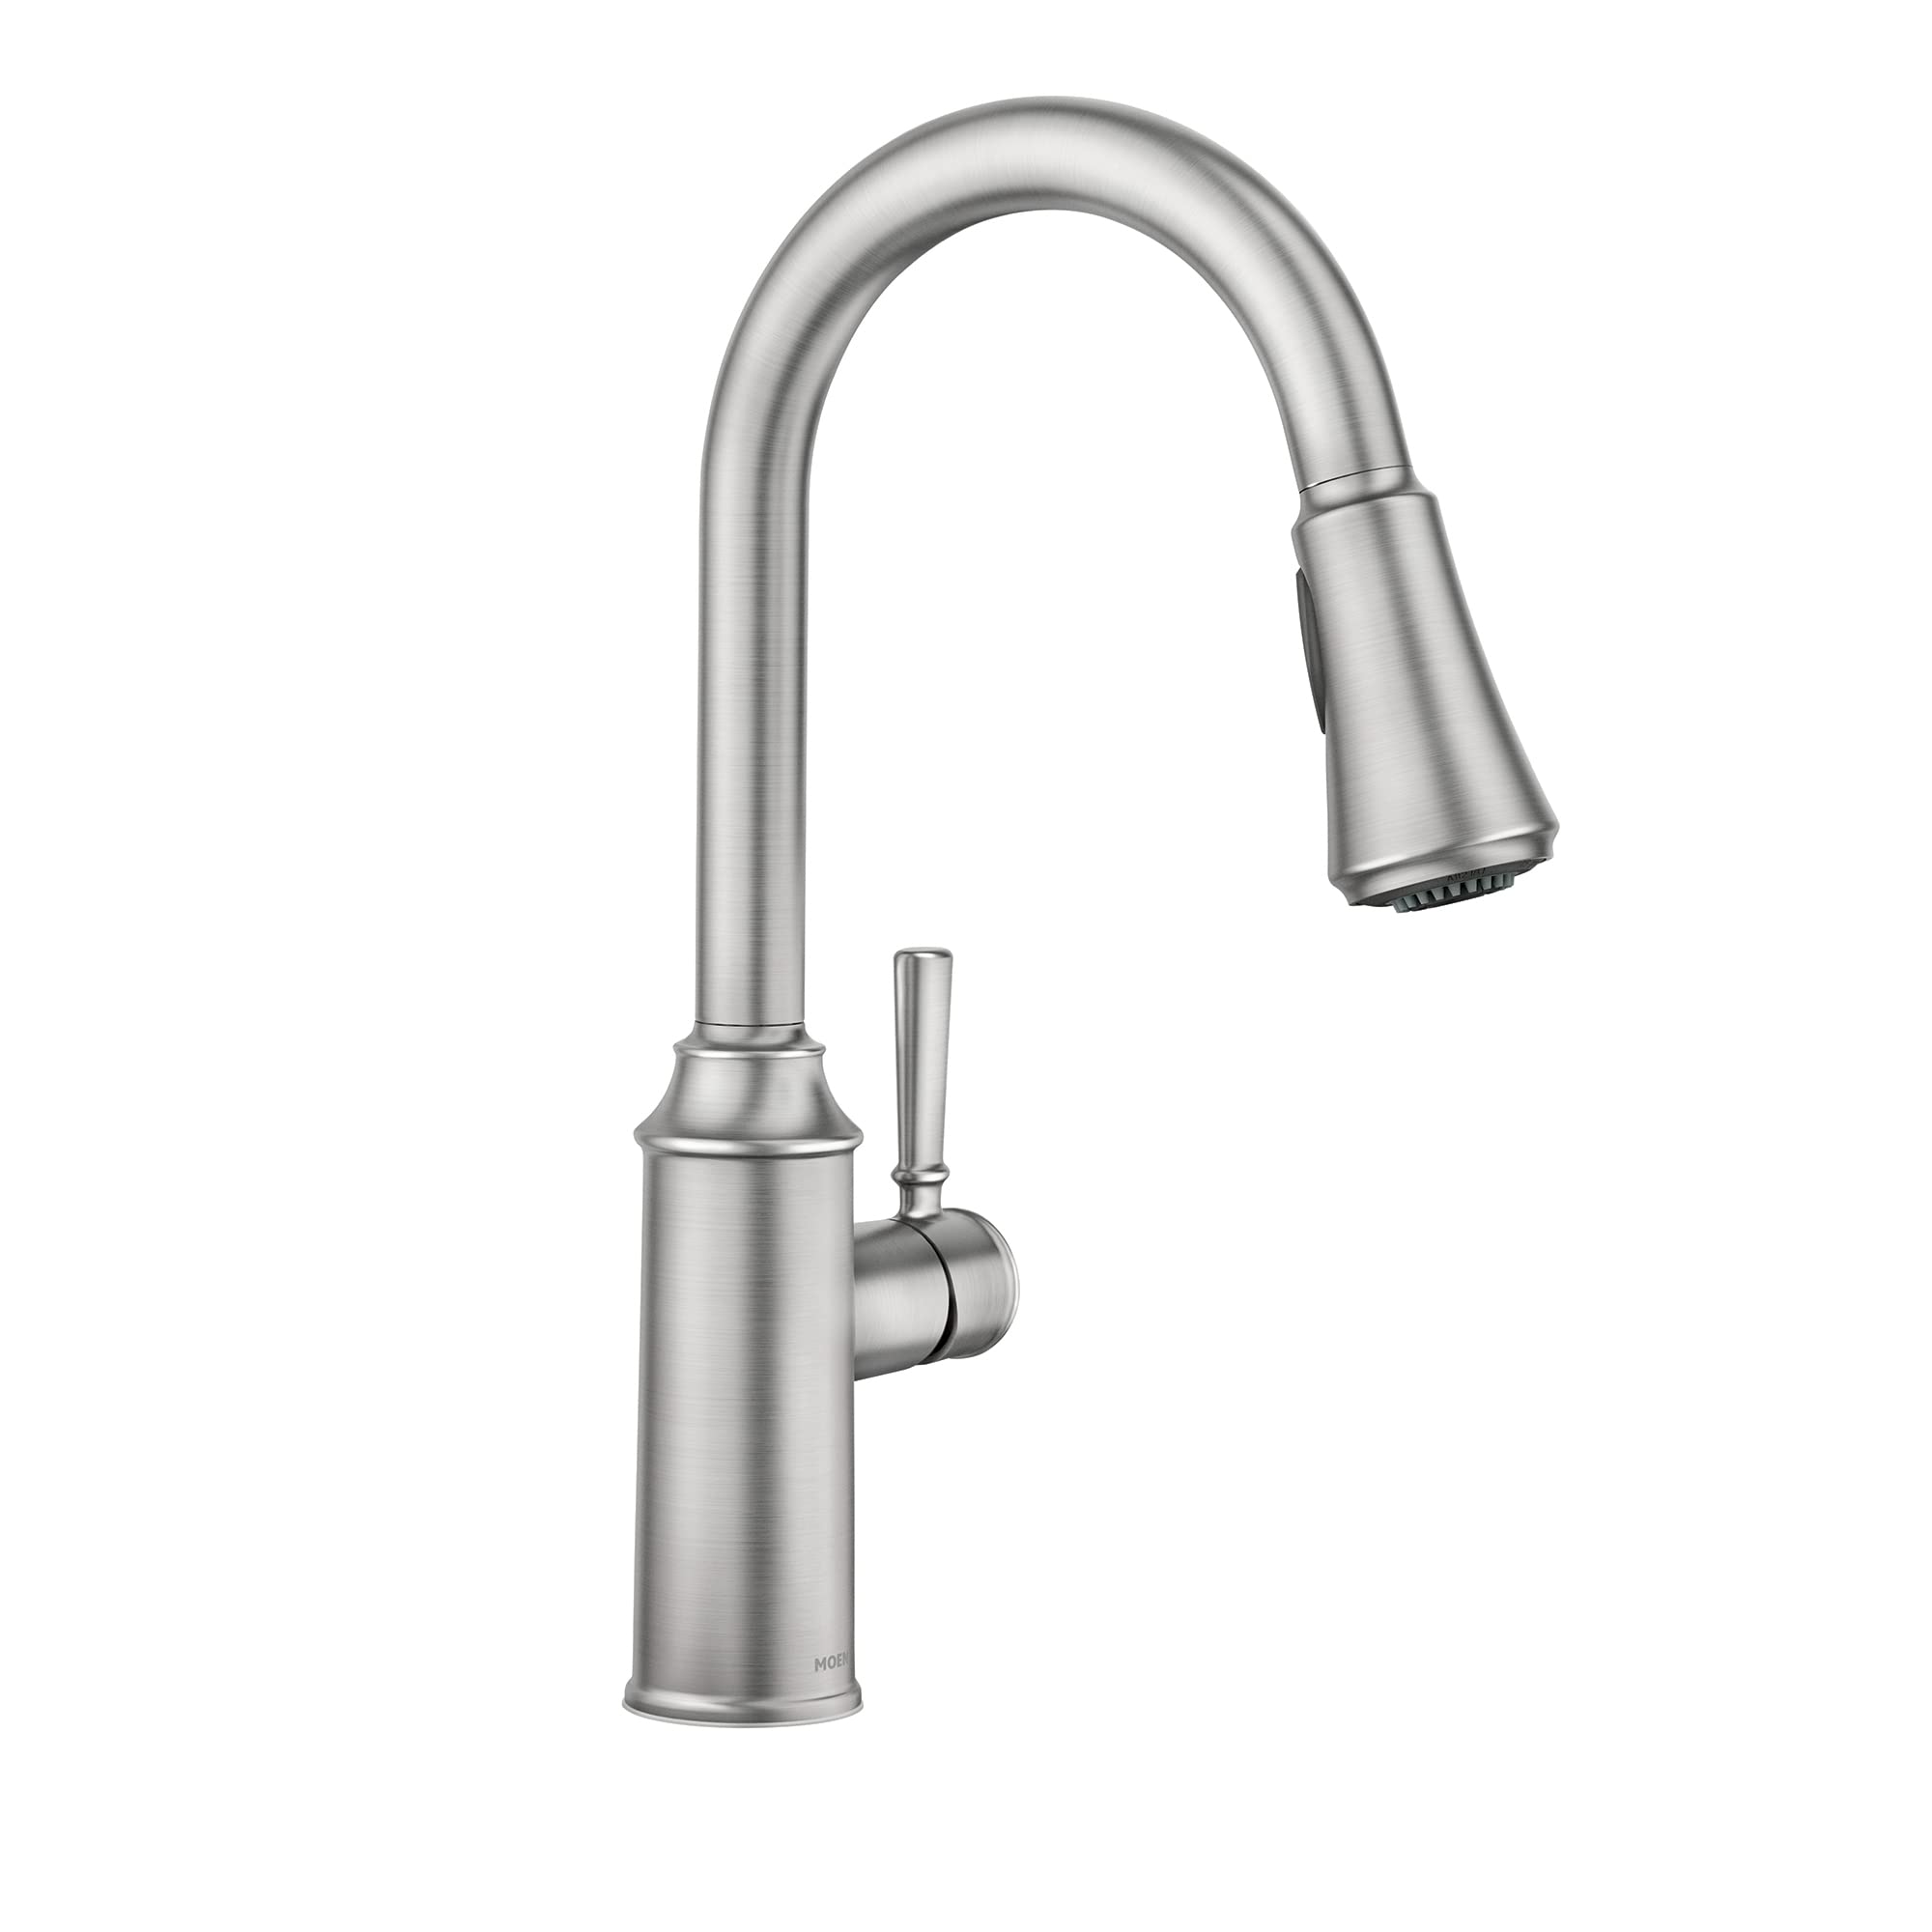 Moen Conneaut Spot Resist Stainless One-Handle High Arc Kitchen Sink Faucet with Power Boost for a Faster Clean, Kitchen Faucet with Pull Down Sprayer, 87801SRS